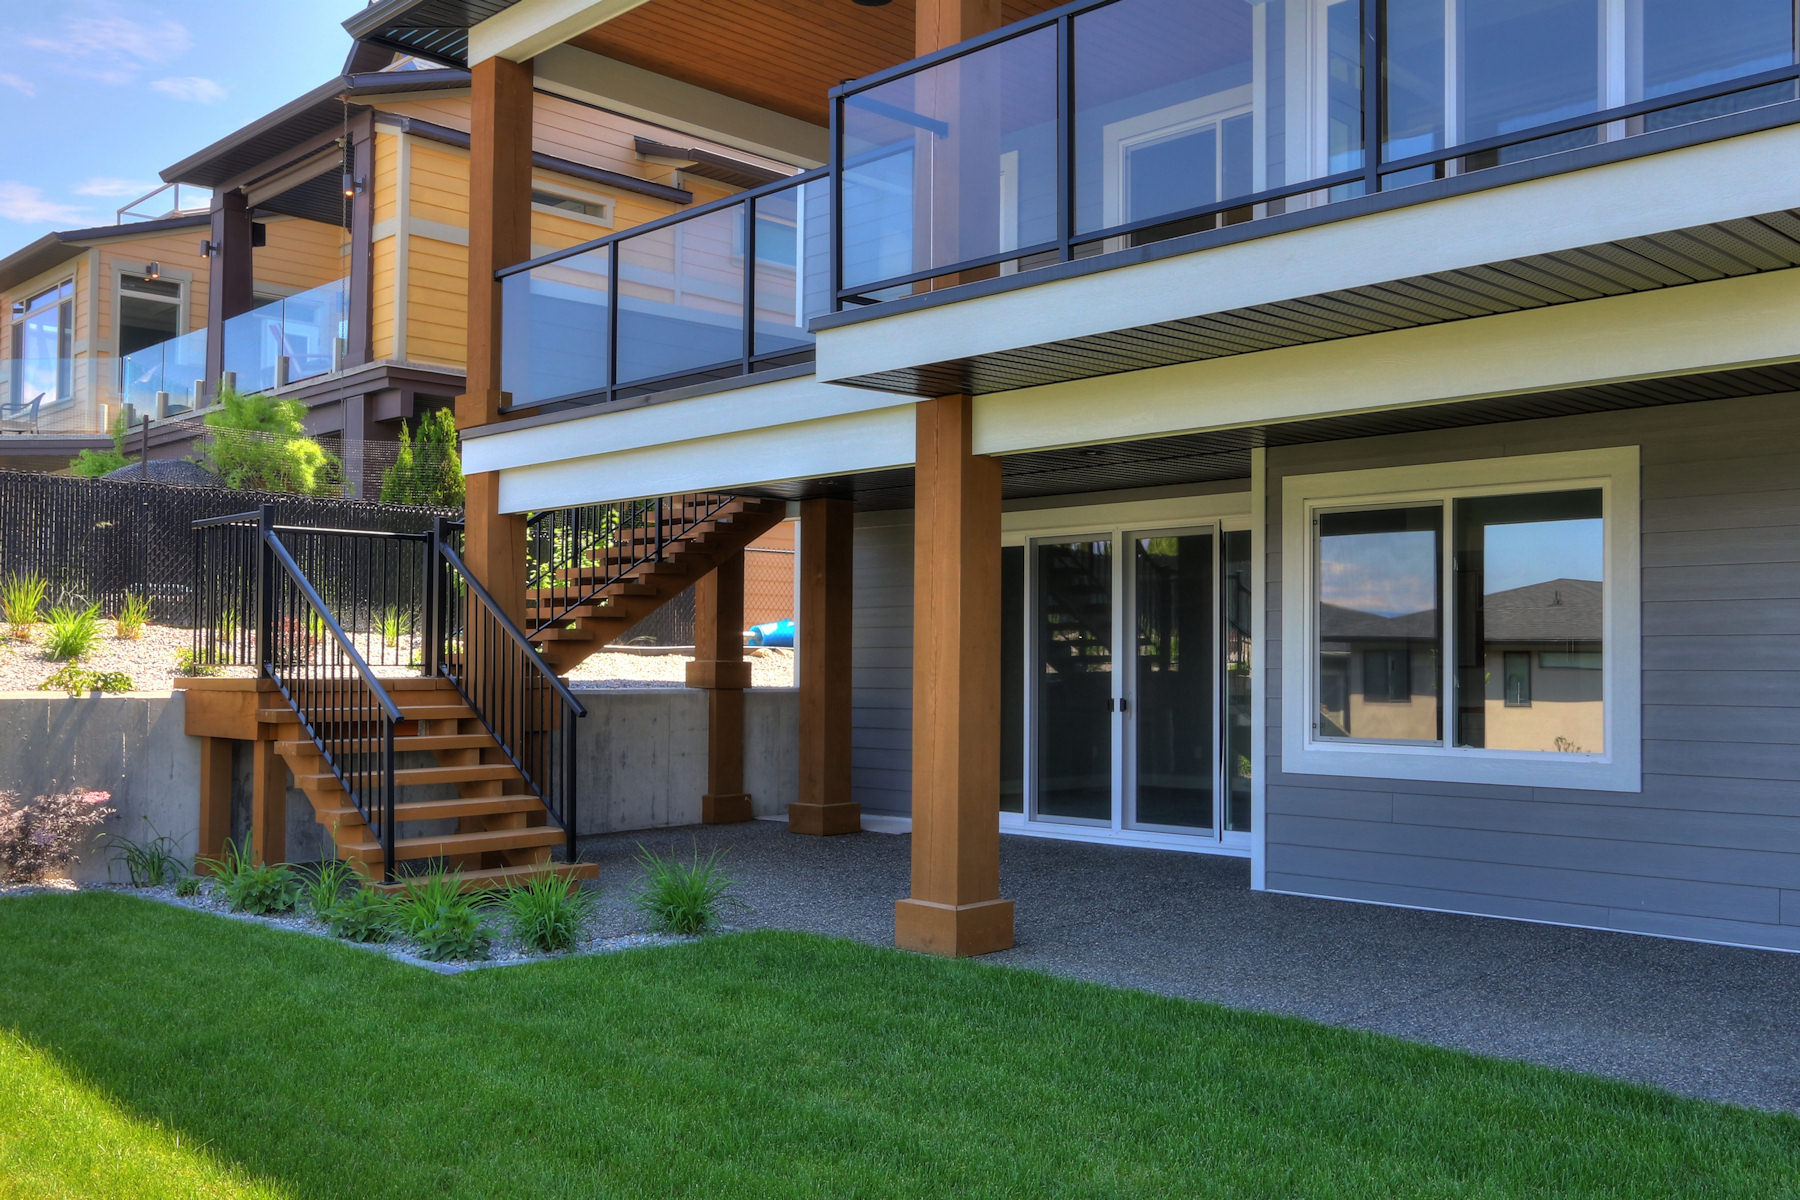 Deck and outdoor patio at 462 Rockview Lane in Kelowna, custom home build done by Stark Homes